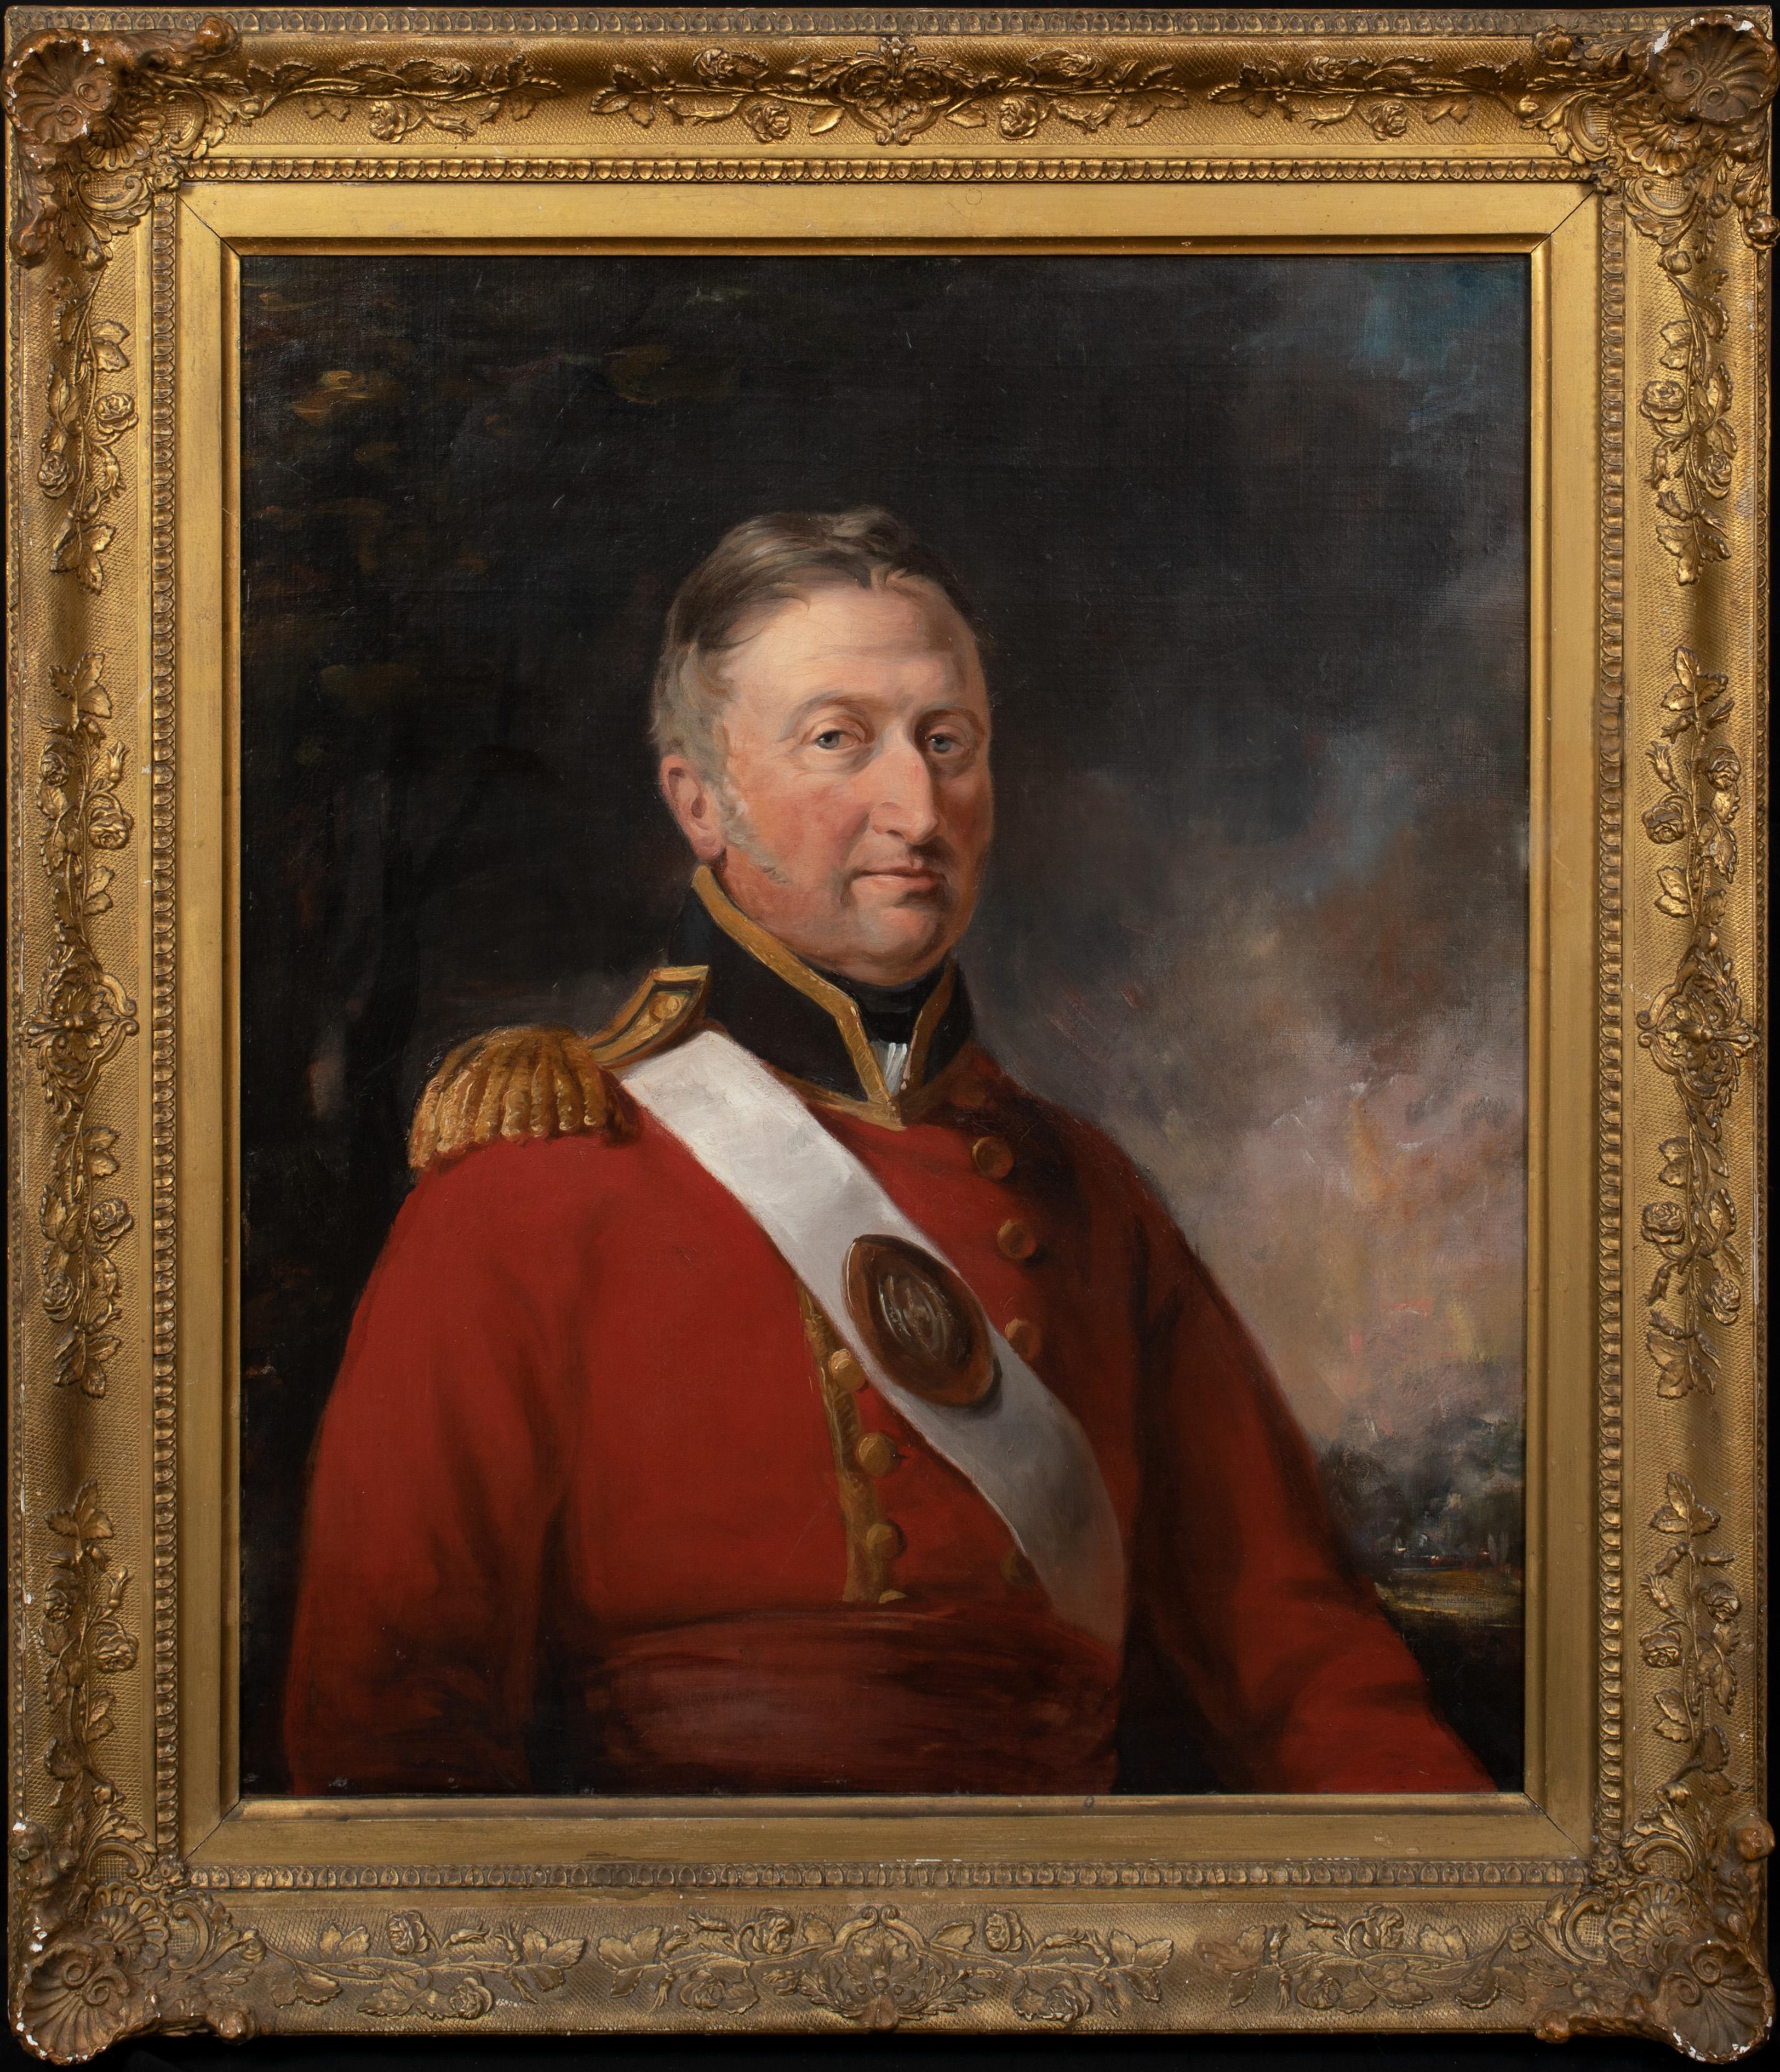 Unknown Portrait Painting - Portrait Of A British Military Officer, circa 1810 - Napoleonic Wars Era